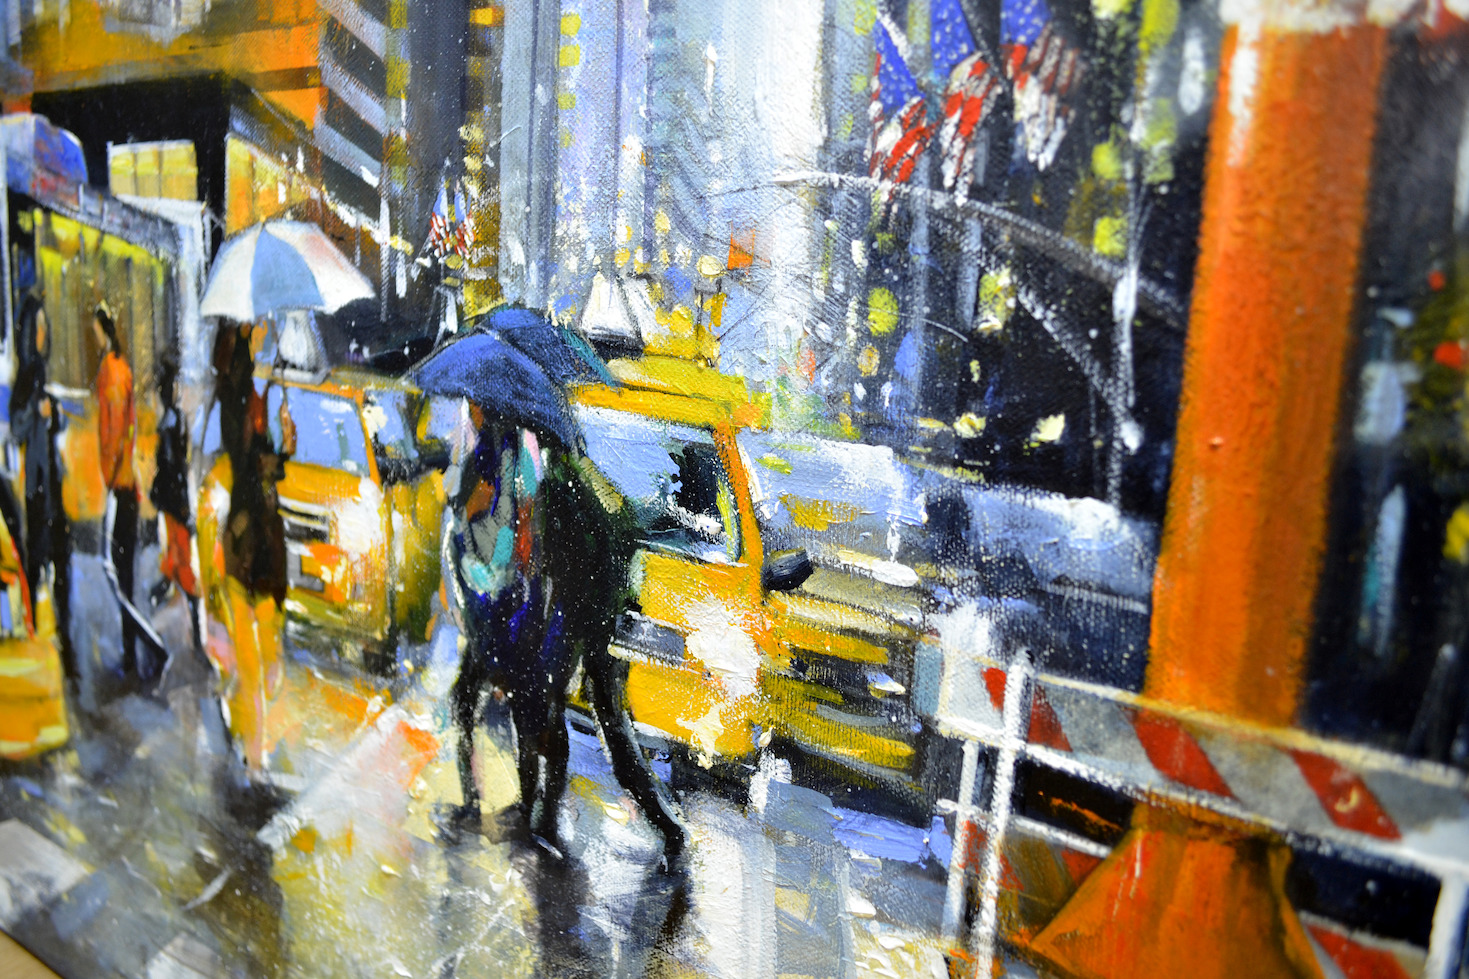 Close Up Detail 3 Of Acrylic Painting "East 50th Street" By Judith Dalozzo